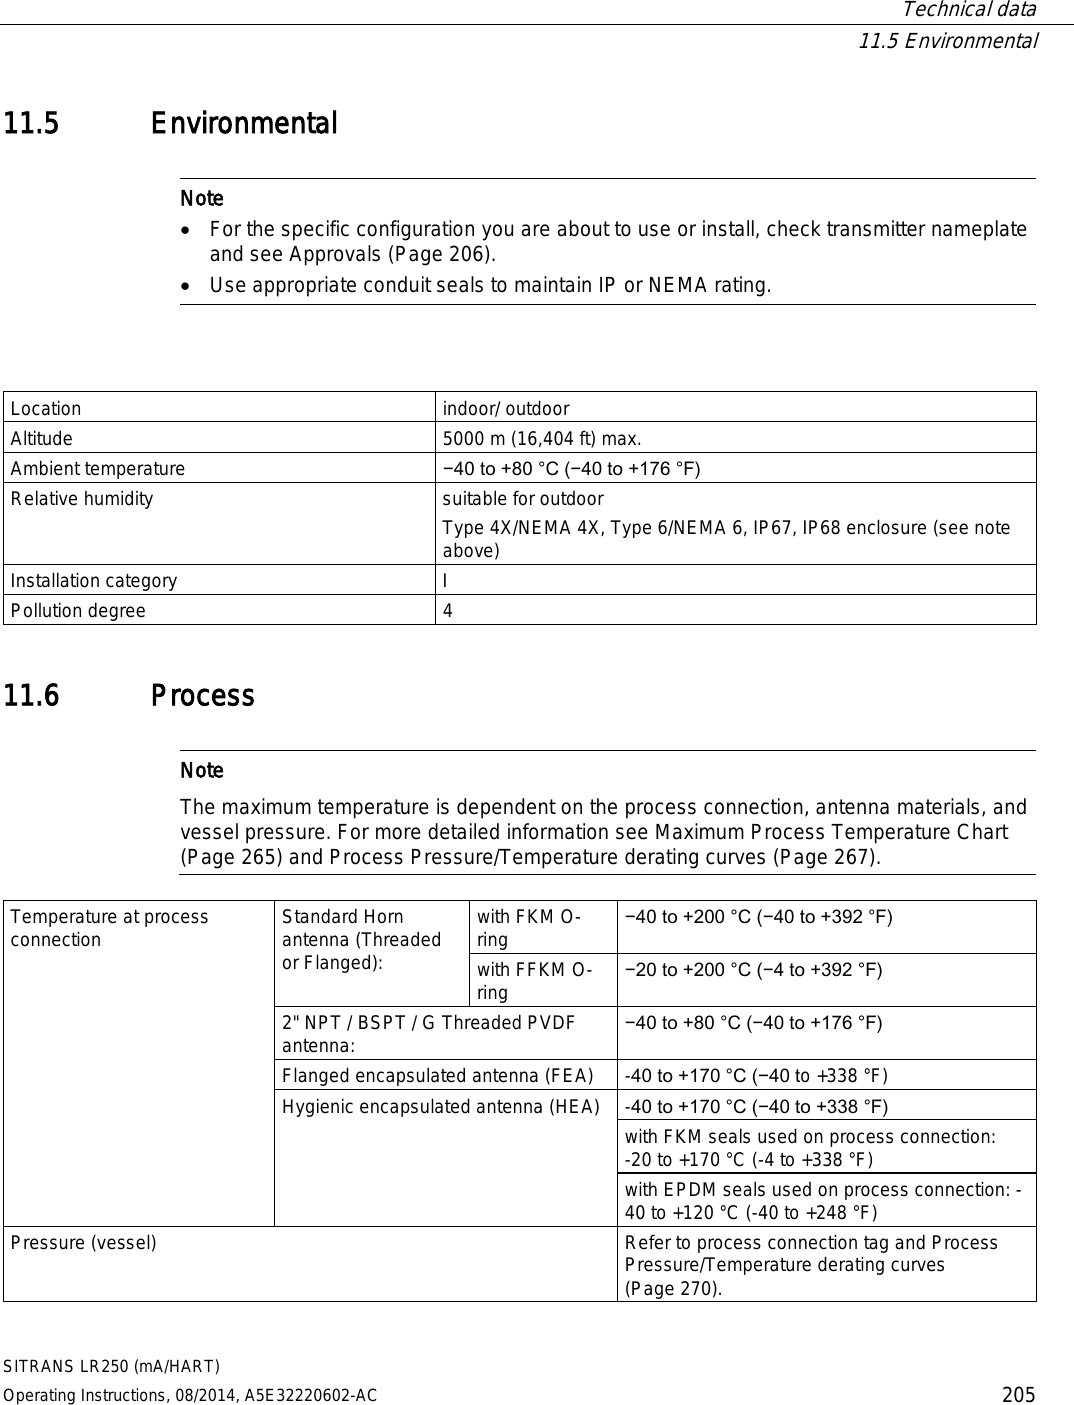  Technical data  11.5 Environmental SITRANS LR250 (mA/HART) Operating Instructions, 08/2014, A5E32220602-AC 205 11.5 Environmental   Note • For the specific configuration you are about to use or install, check transmitter nameplate and see Approvals (Page 206).  • Use appropriate conduit seals to maintain IP or NEMA rating.    Location indoor/ outdoor Altitude 5000 m (16,404 ft) max. Ambient temperature −40 to +80 °C (−40 to +176 °F) Relative humidity suitable for outdoor  Type 4X/NEMA 4X, Type 6/NEMA 6, IP67, IP68 enclosure (see note above) Installation category  I Pollution degree 4  11.6 Process   Note The maximum temperature is dependent on the process connection, antenna materials, and vessel pressure. For more detailed information see Maximum Process Temperature Chart (Page 265) and Process Pressure/Temperature derating curves (Page 267).   Temperature at process connection Standard Horn antenna (Threaded or Flanged):  with FKM O-ring −40 to +200 °C (−40 to +392 °F) with FFKM O-ring −20 to +200 °C (−4 to +392 °F) 2&quot; NPT / BSPT / G Threaded PVDF antenna: −40 to +80 °C (−40 to +176 °F) Flanged encapsulated antenna (FEA) -40 to +170 °C (−40 to +338 °F) Hygienic encapsulated antenna (HEA) -40 to +170 °C (−40 to +338 °F) with FKM seals used on process connection:  -20 to +170 °C (-4 to +338 °F) with EPDM seals used on process connection: -40 to +120 °C (-40 to +248 °F) Pressure (vessel) Refer to process connection tag and Process Pressure/Temperature derating curves (Page 270).  